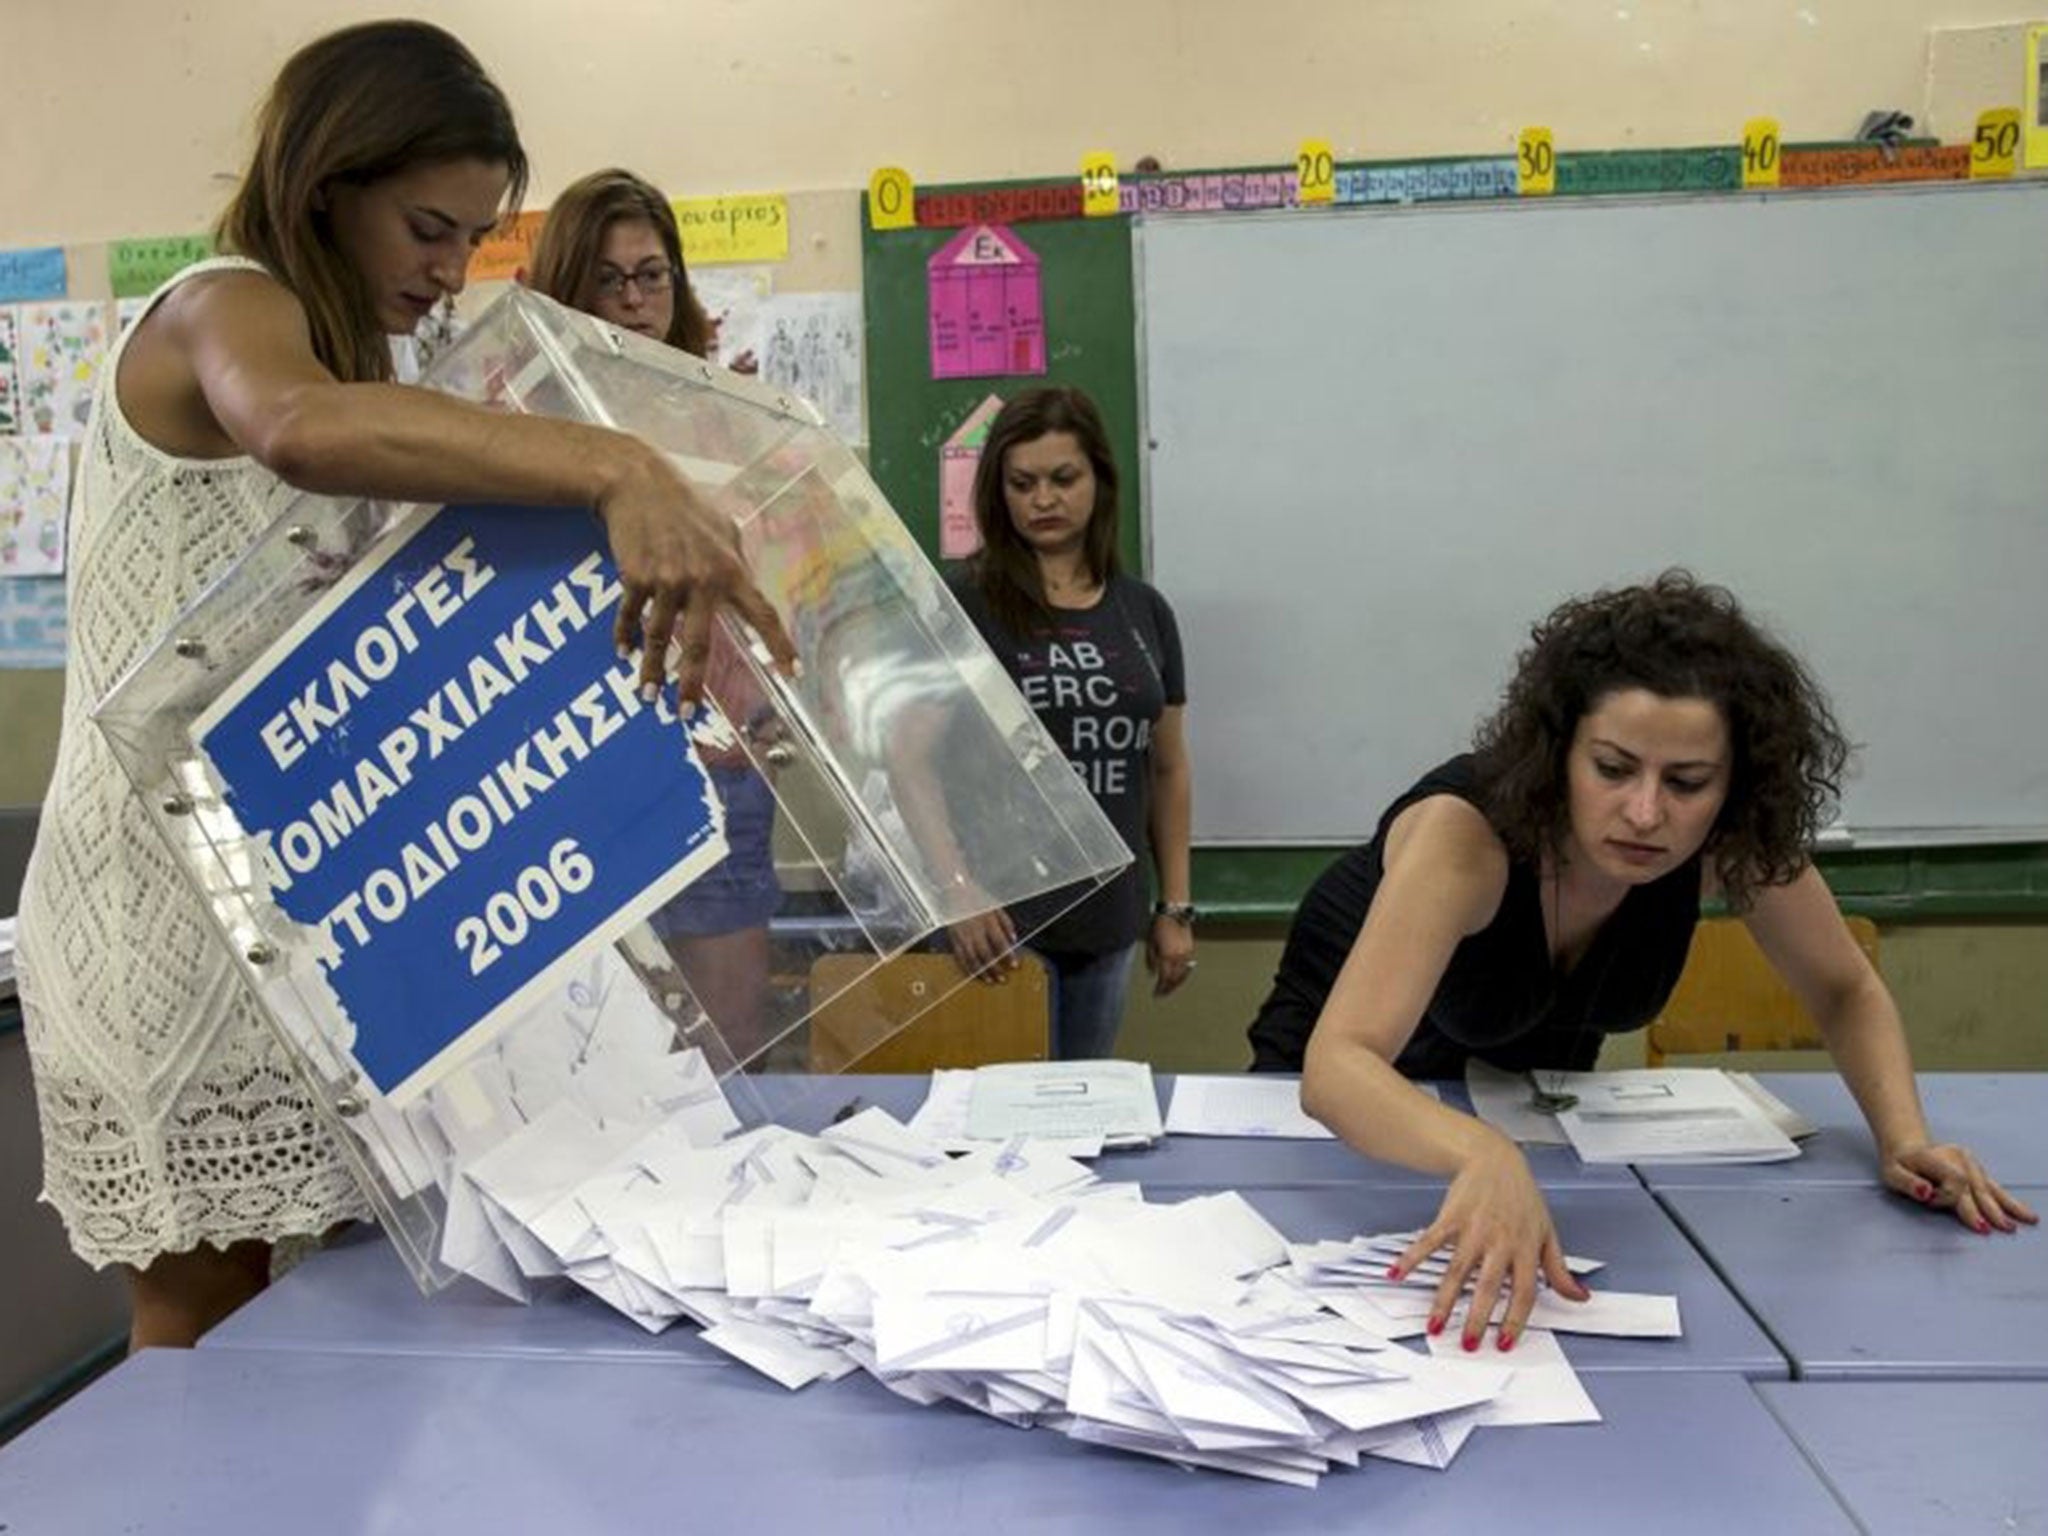 A ballot box is emptied by a voting official at the closing of polling stations in Athens, Greece July 5, 2015. Greece voted on Sunday on whether to accept more austerity in exchange for international aid, in a high-stakes referendum likely to determine w